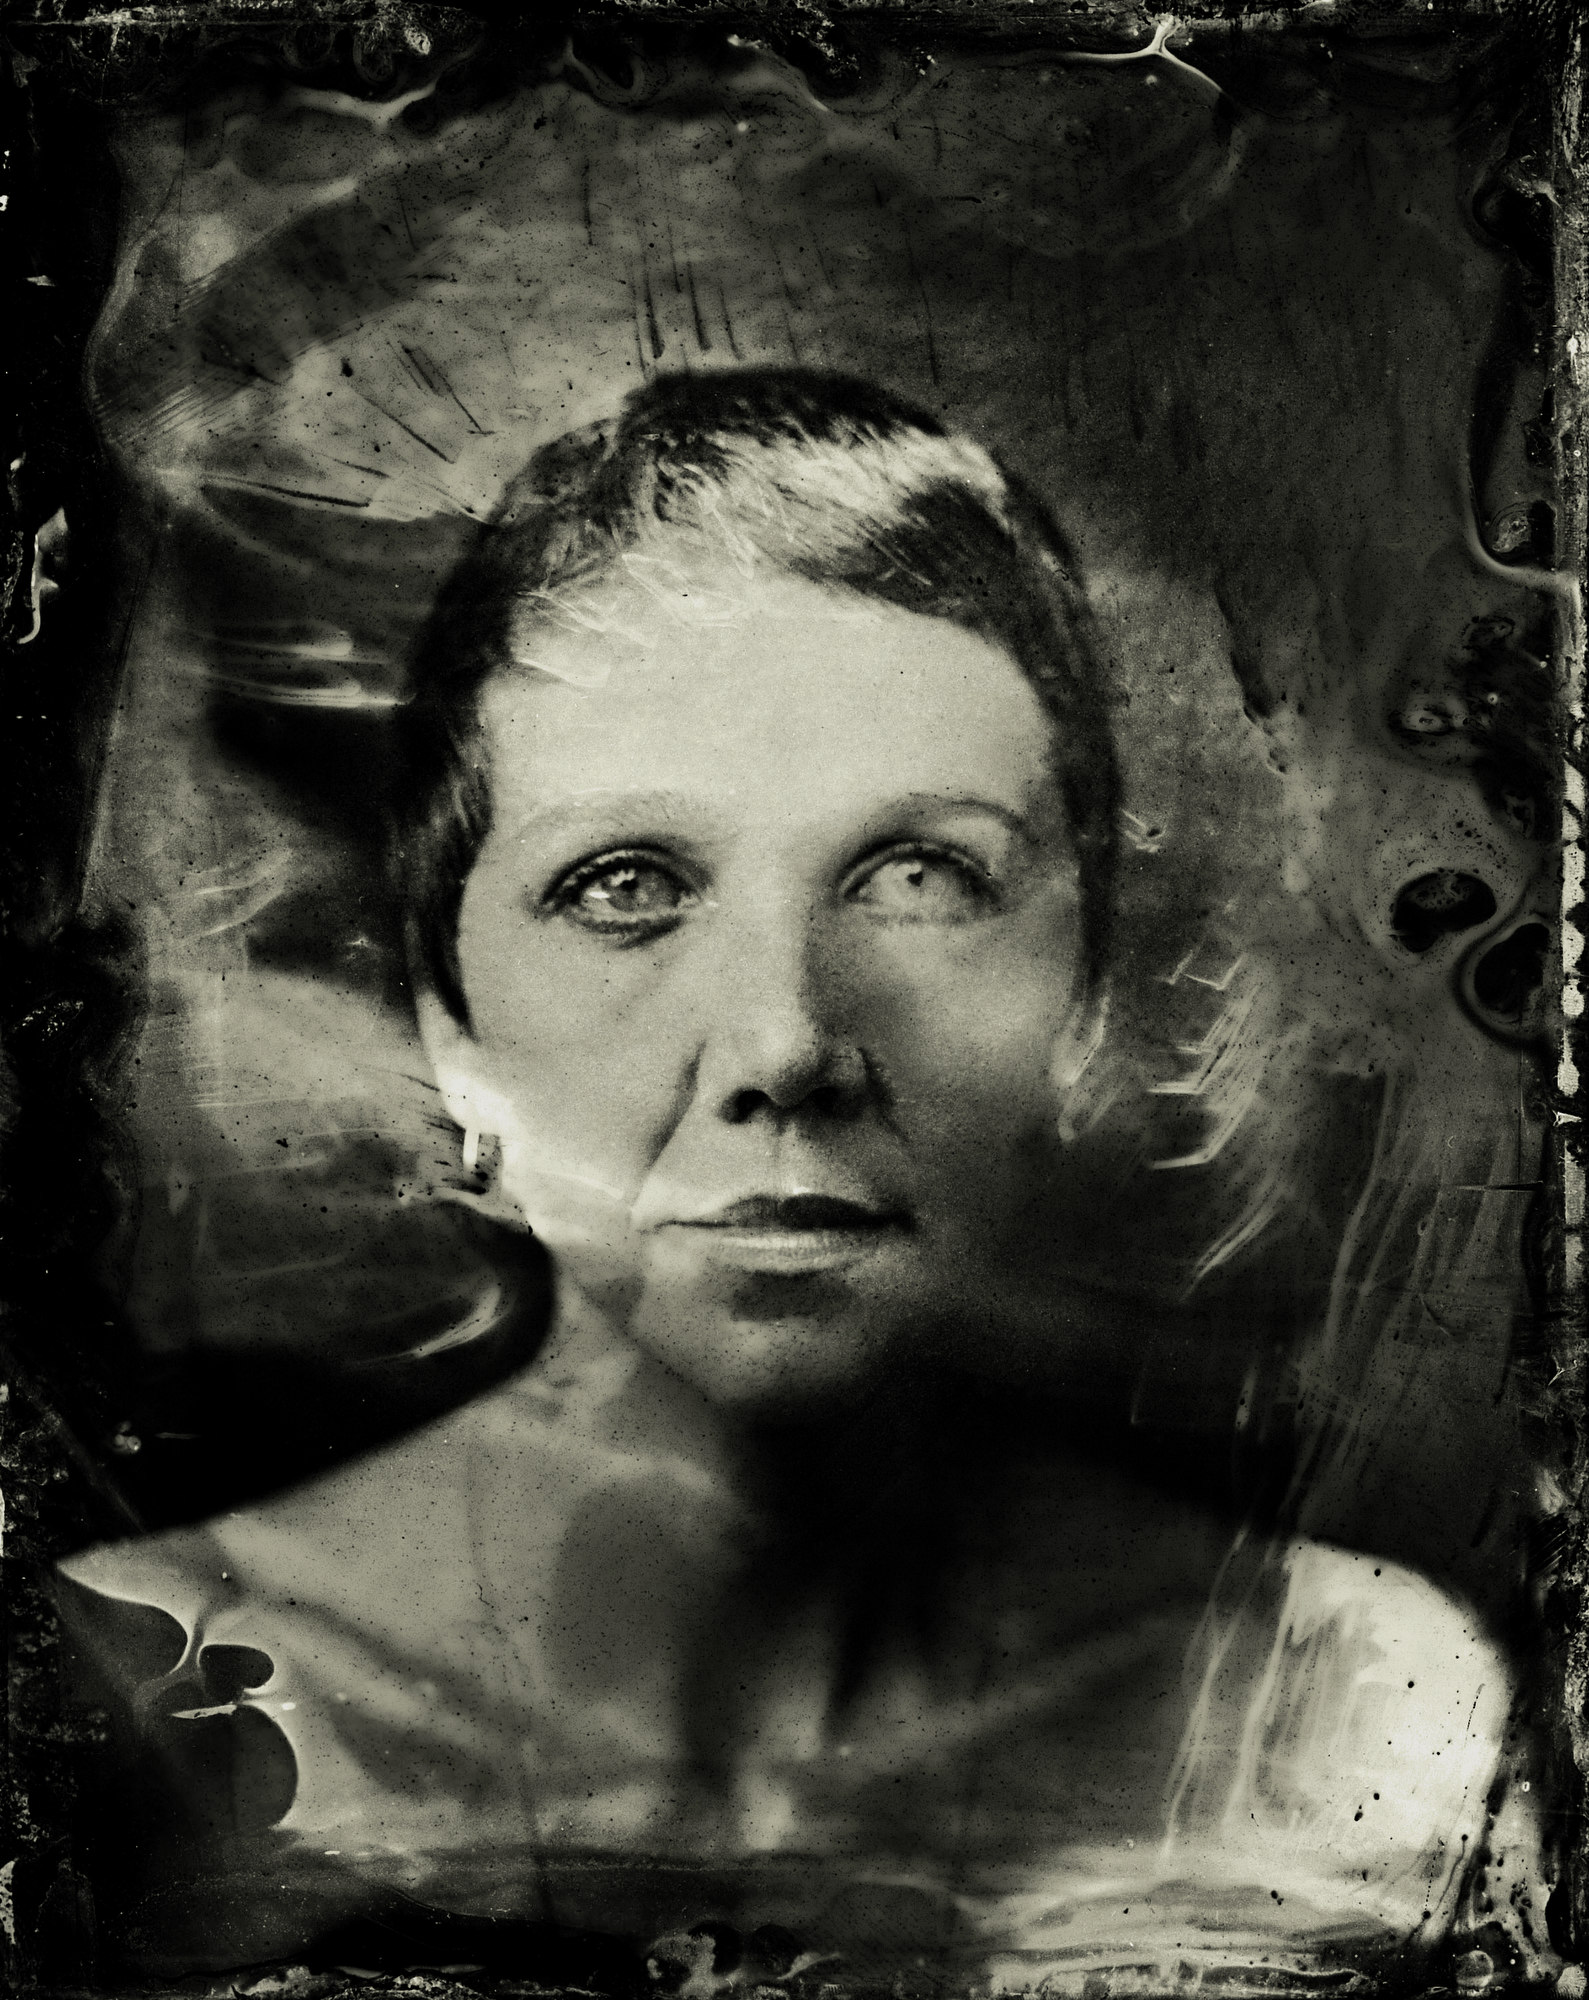 Maggie Gyllenhaal poses for a tintype (wet collodion) portrait at The Collective and Gibson Lounge Powered by CEG, during the 2014 Sundance Film Festival in Park City, Utah. (Photo by Victoria Will/Invision/AP)